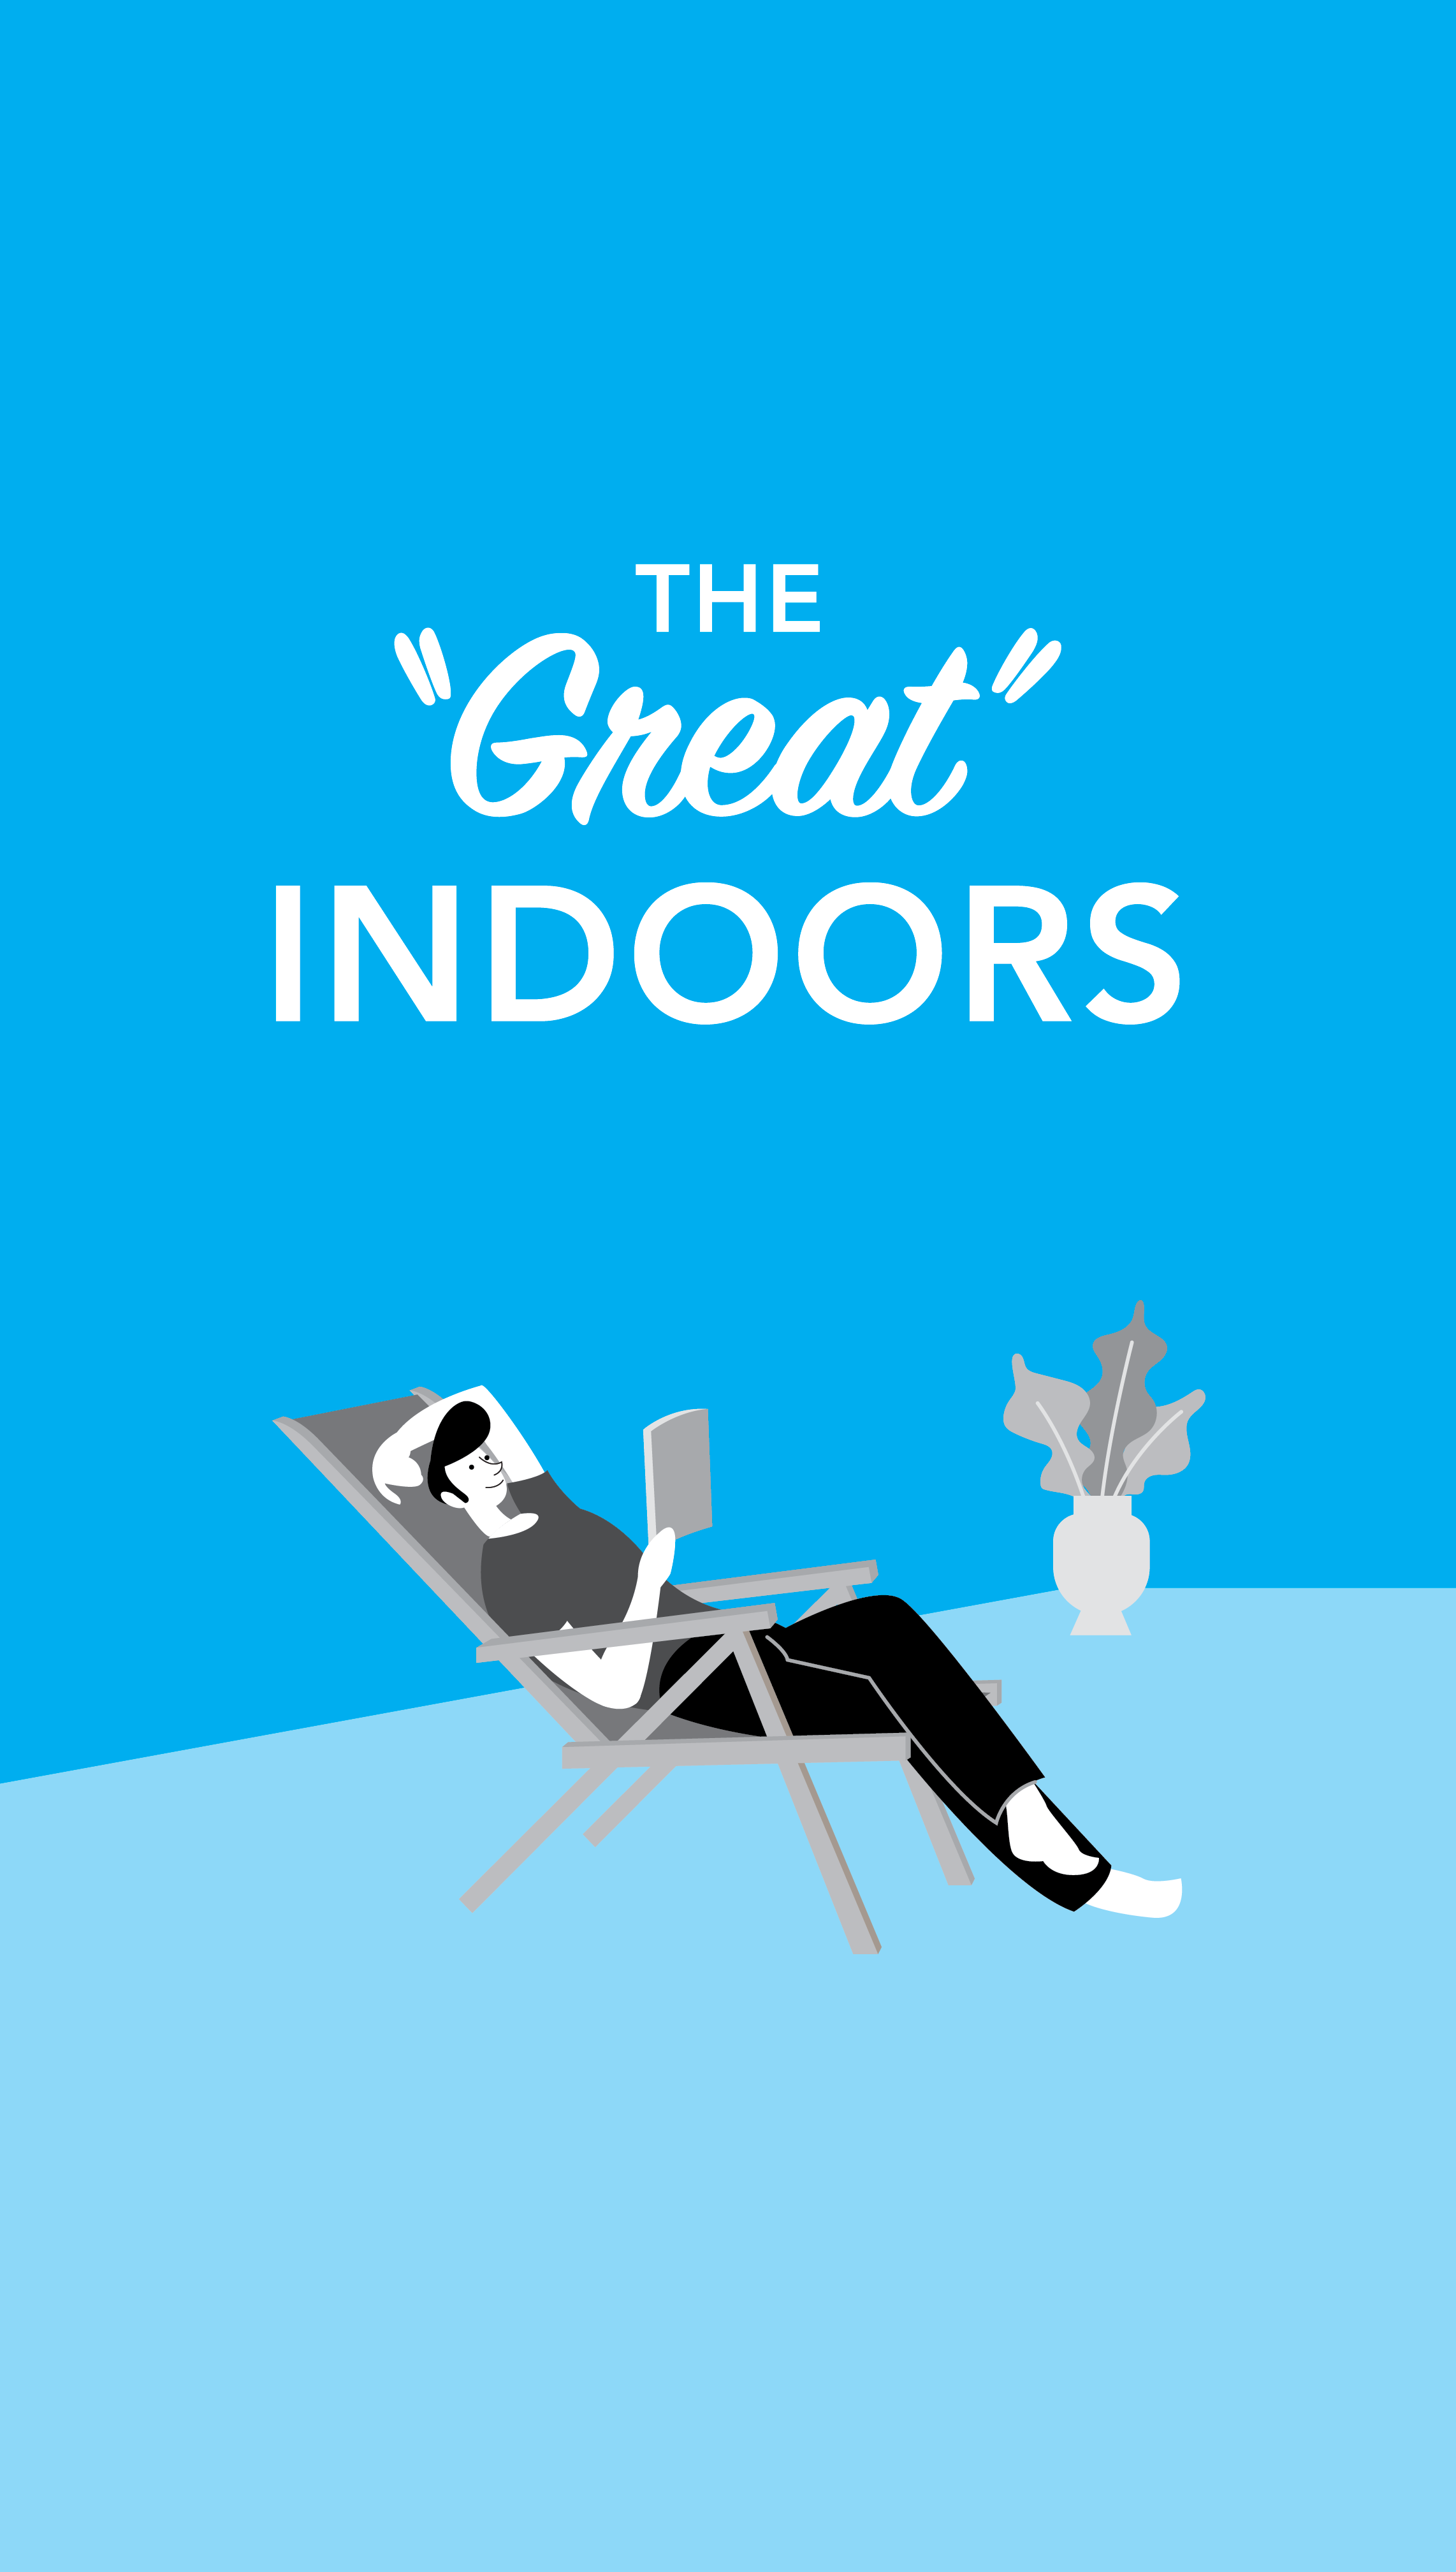 The 'Great' Indoors